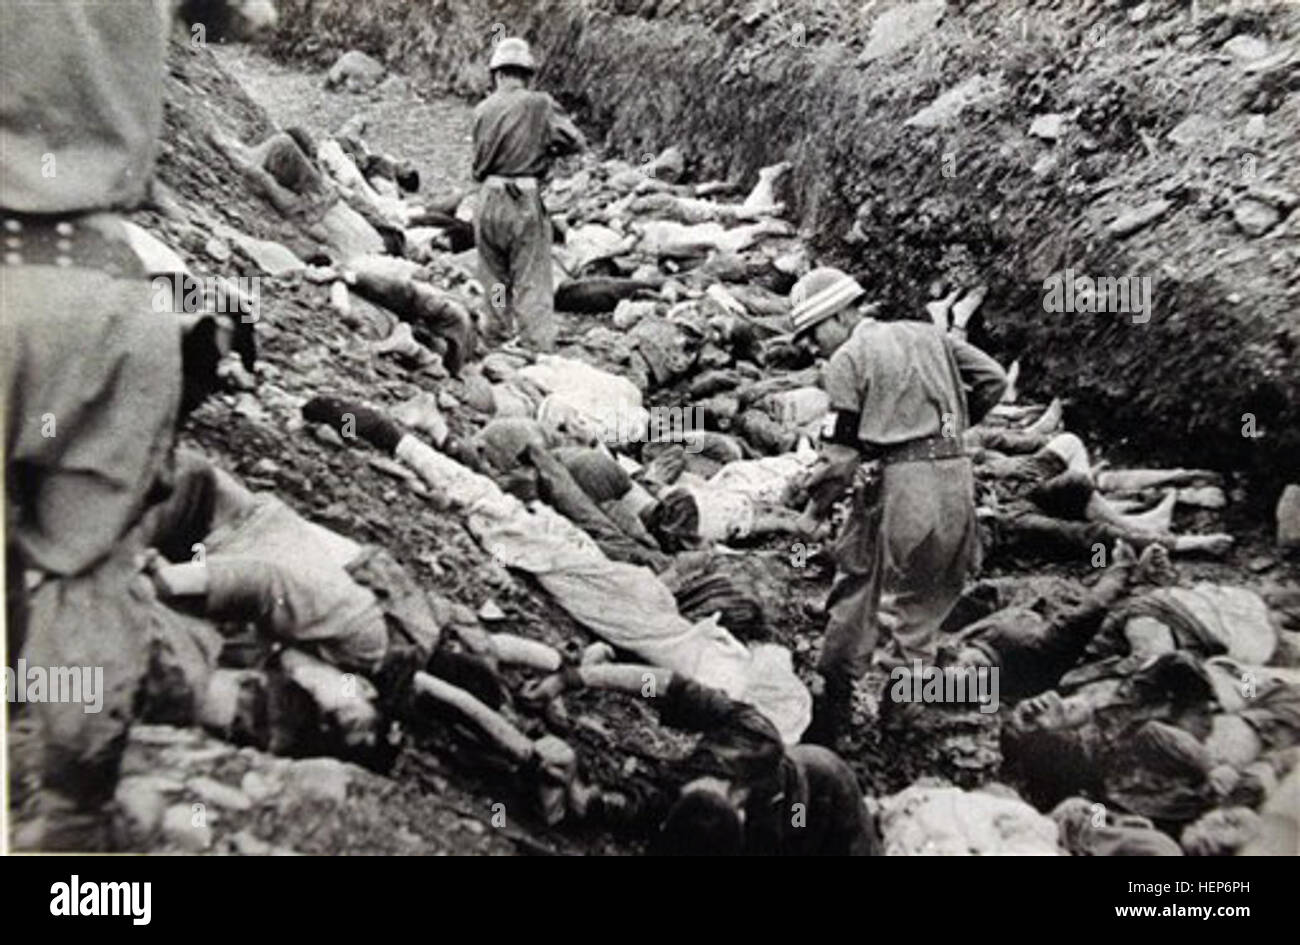 FILE - In this July 1950 U.S. Army file photograph once classified 'top secret,' South Korean soldiers walk among some of the thousands of South Korean political prisoners shot at Taejon, South Korea, early in the Korean War. Shutting down its inquiry into South Korea's hidden history, a government commission investigating a century of human rights abuses will leave unexplored scores of suspected mass graves believed to hold remains of tens of thousands of South Korean political detainees summarily executed by their government early in the Korean War, sometimes as U.S. officers watched. In a p Stock Photo